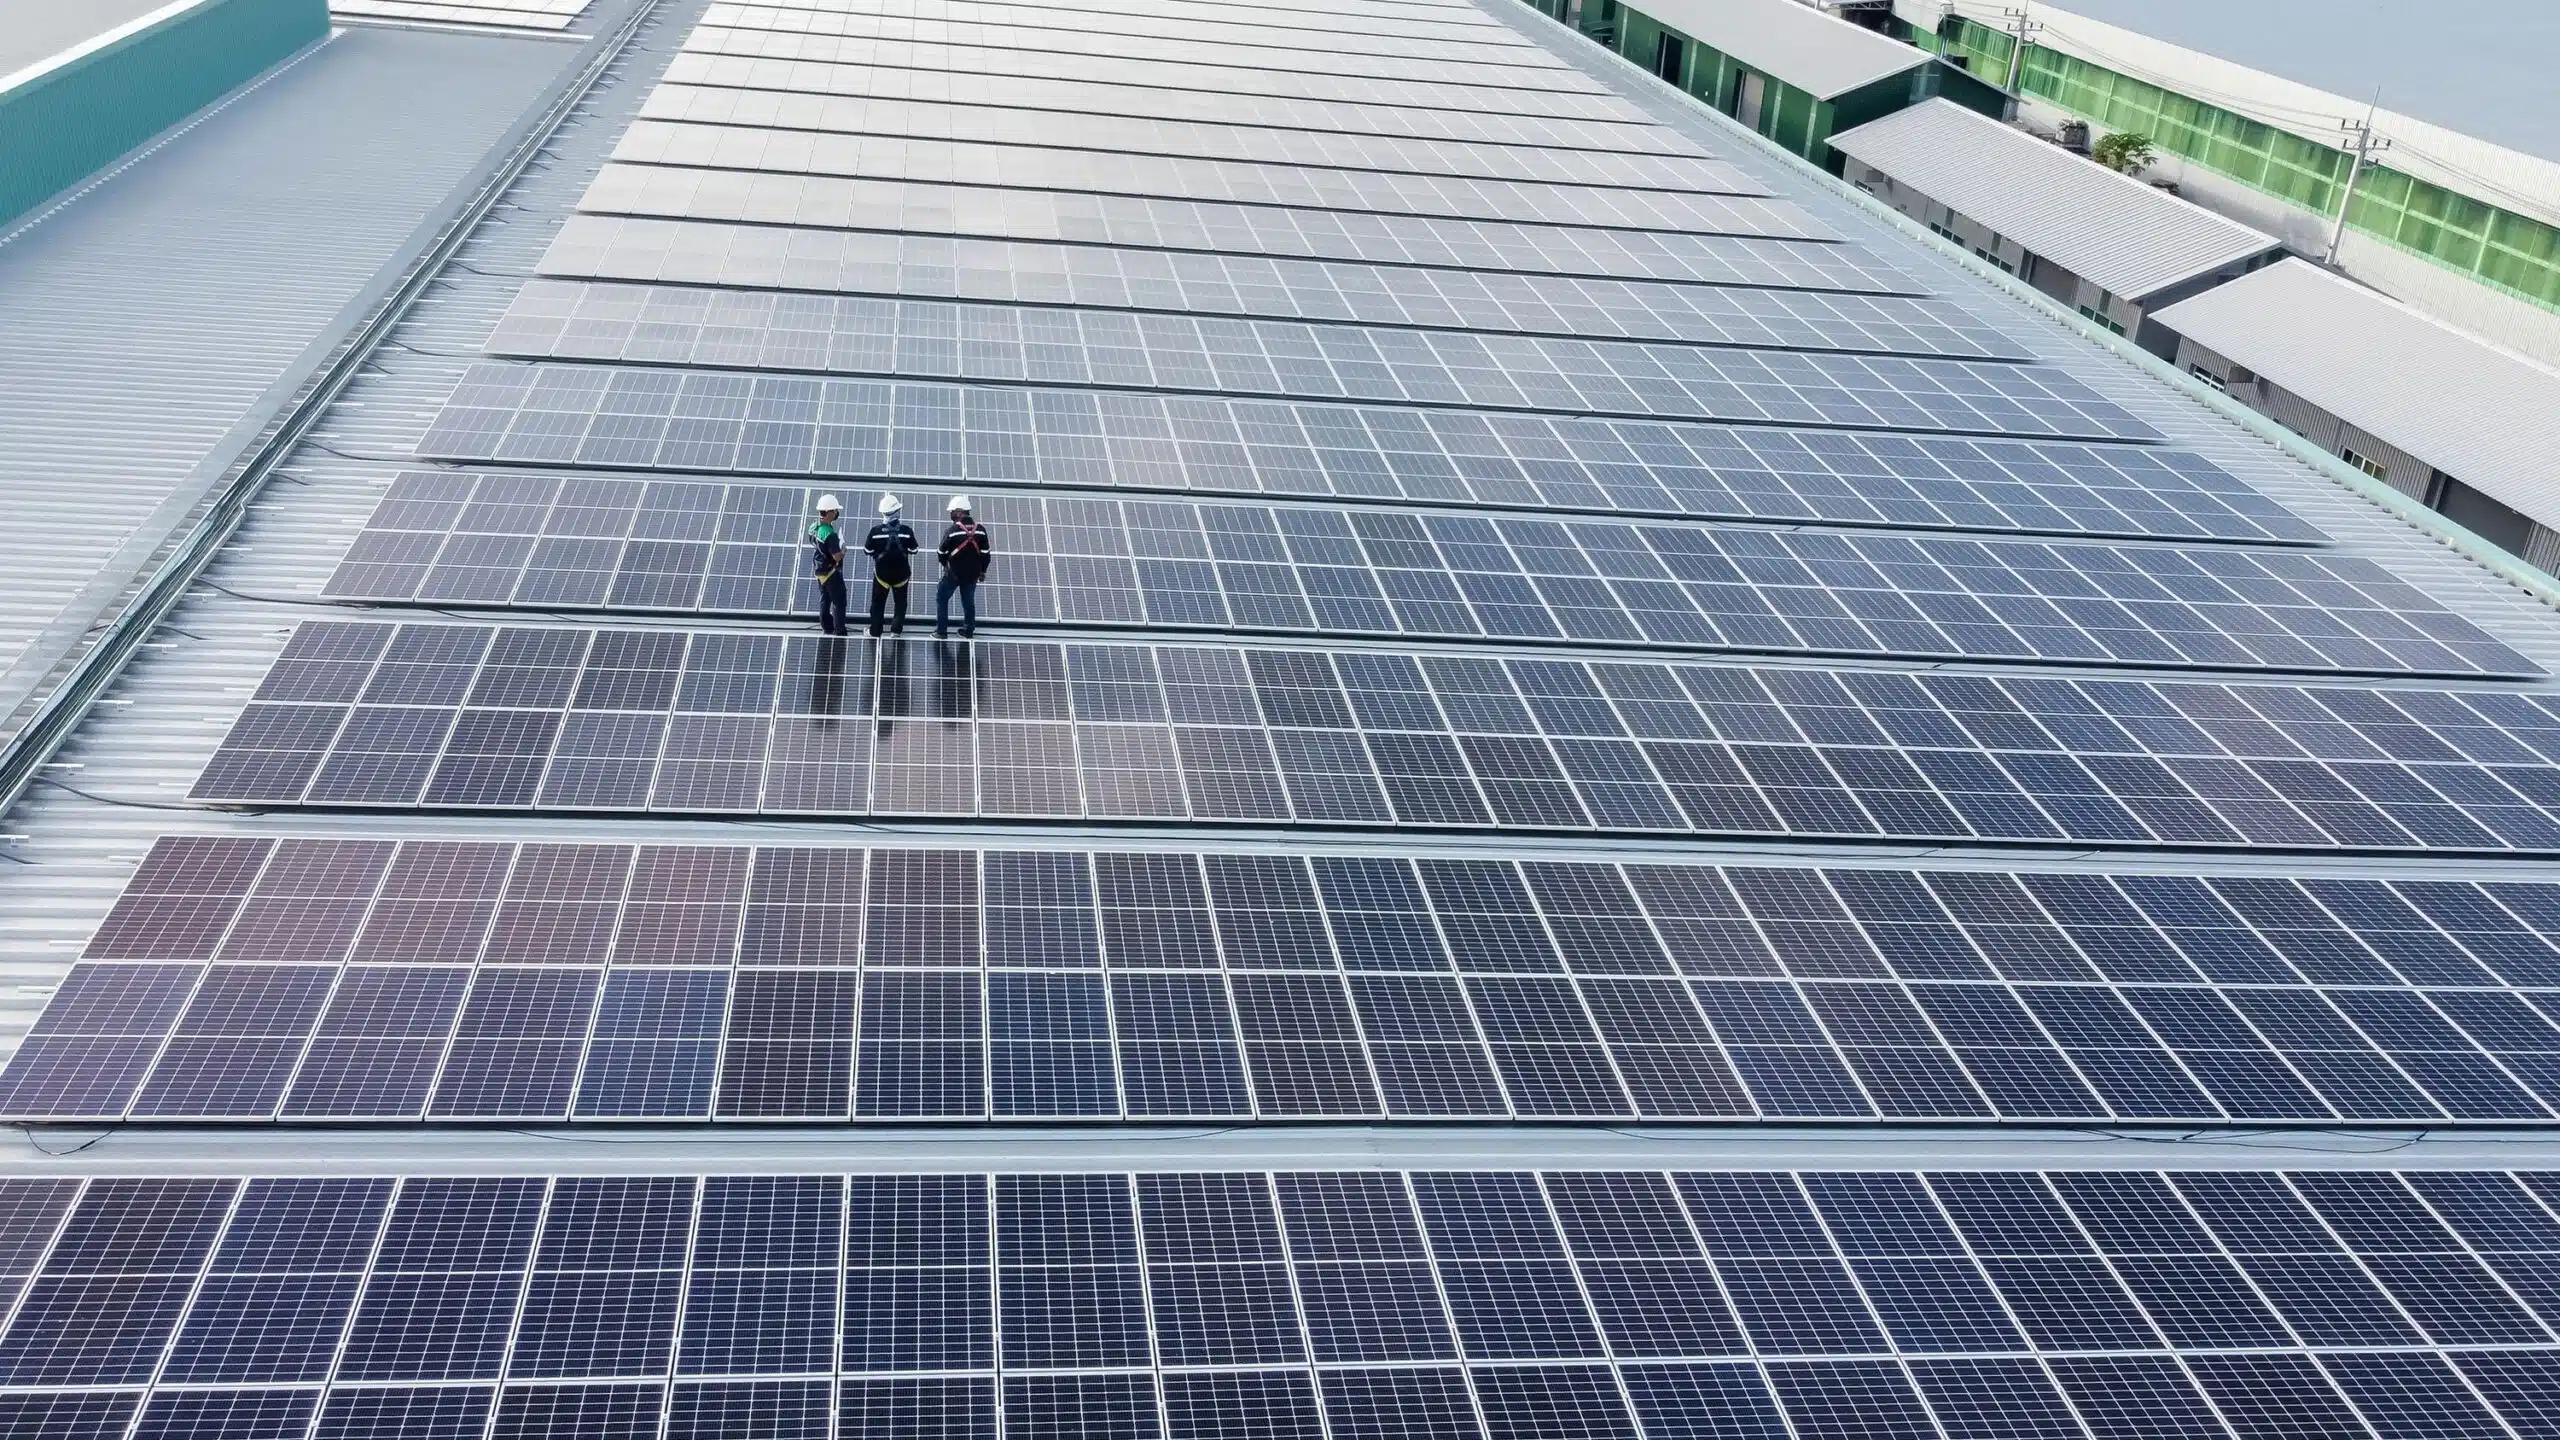 solar panel professionals standing on a solar panel grid